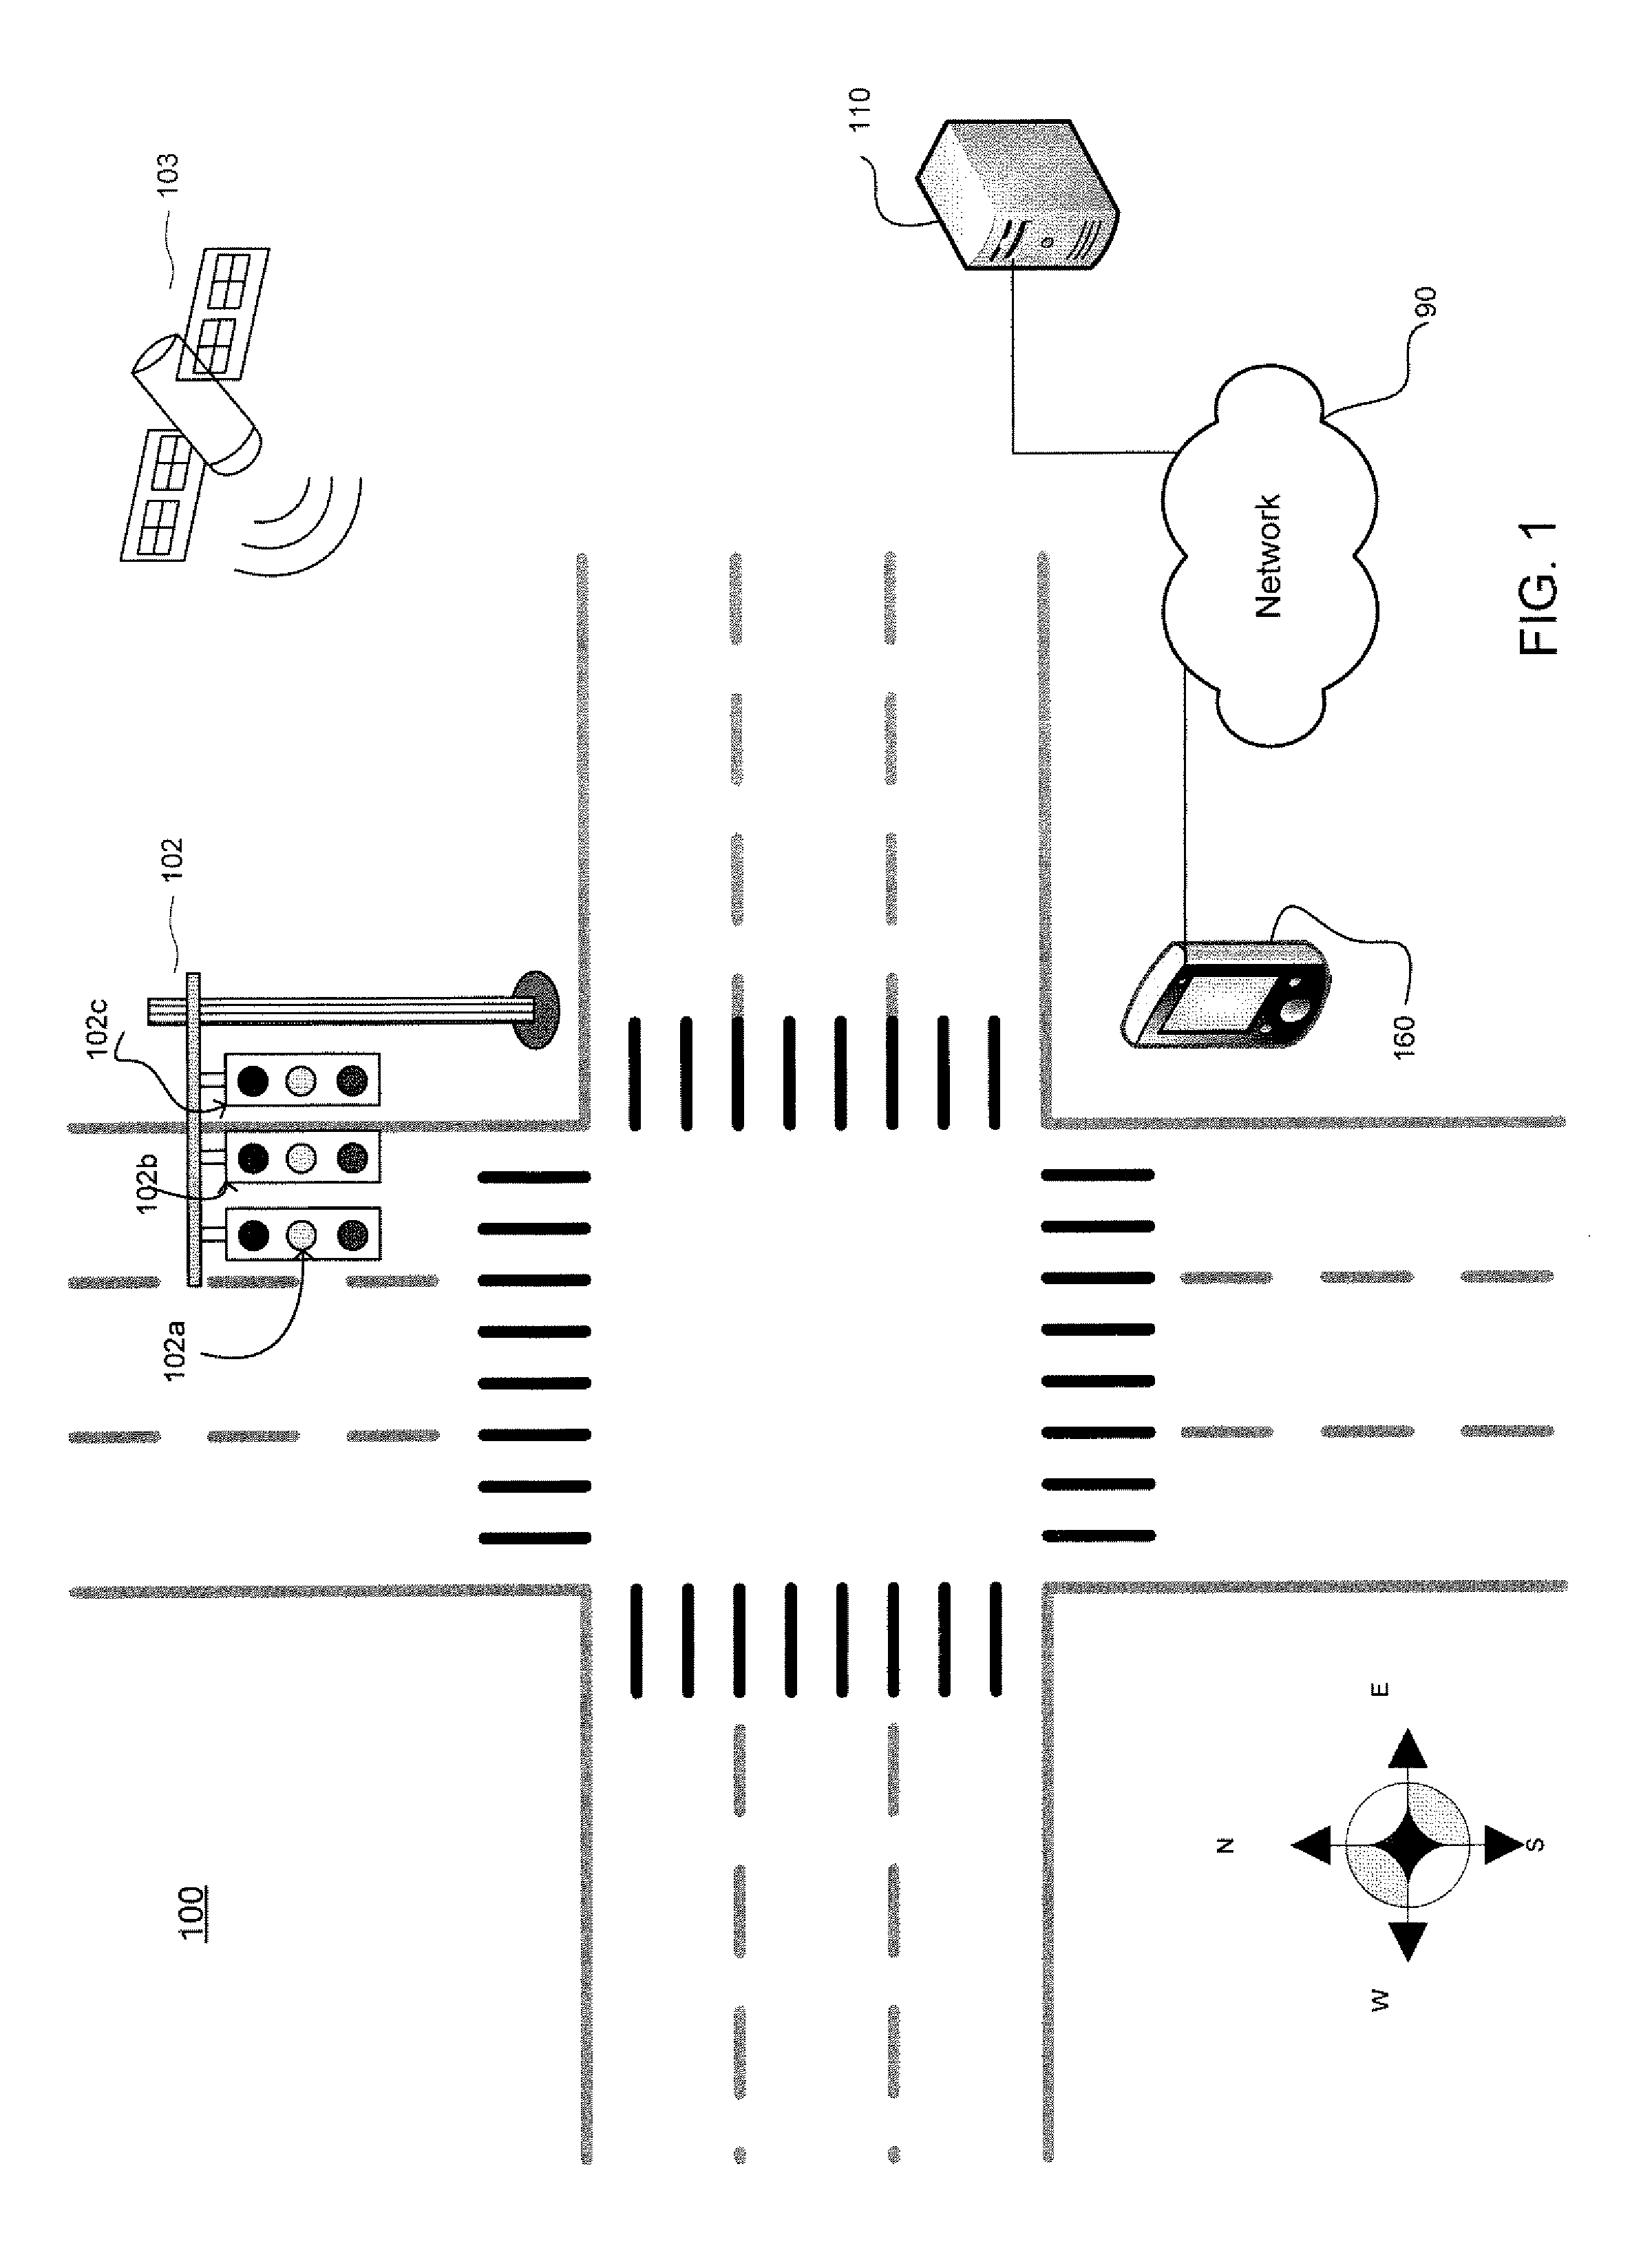 Traffic light detecting system and method